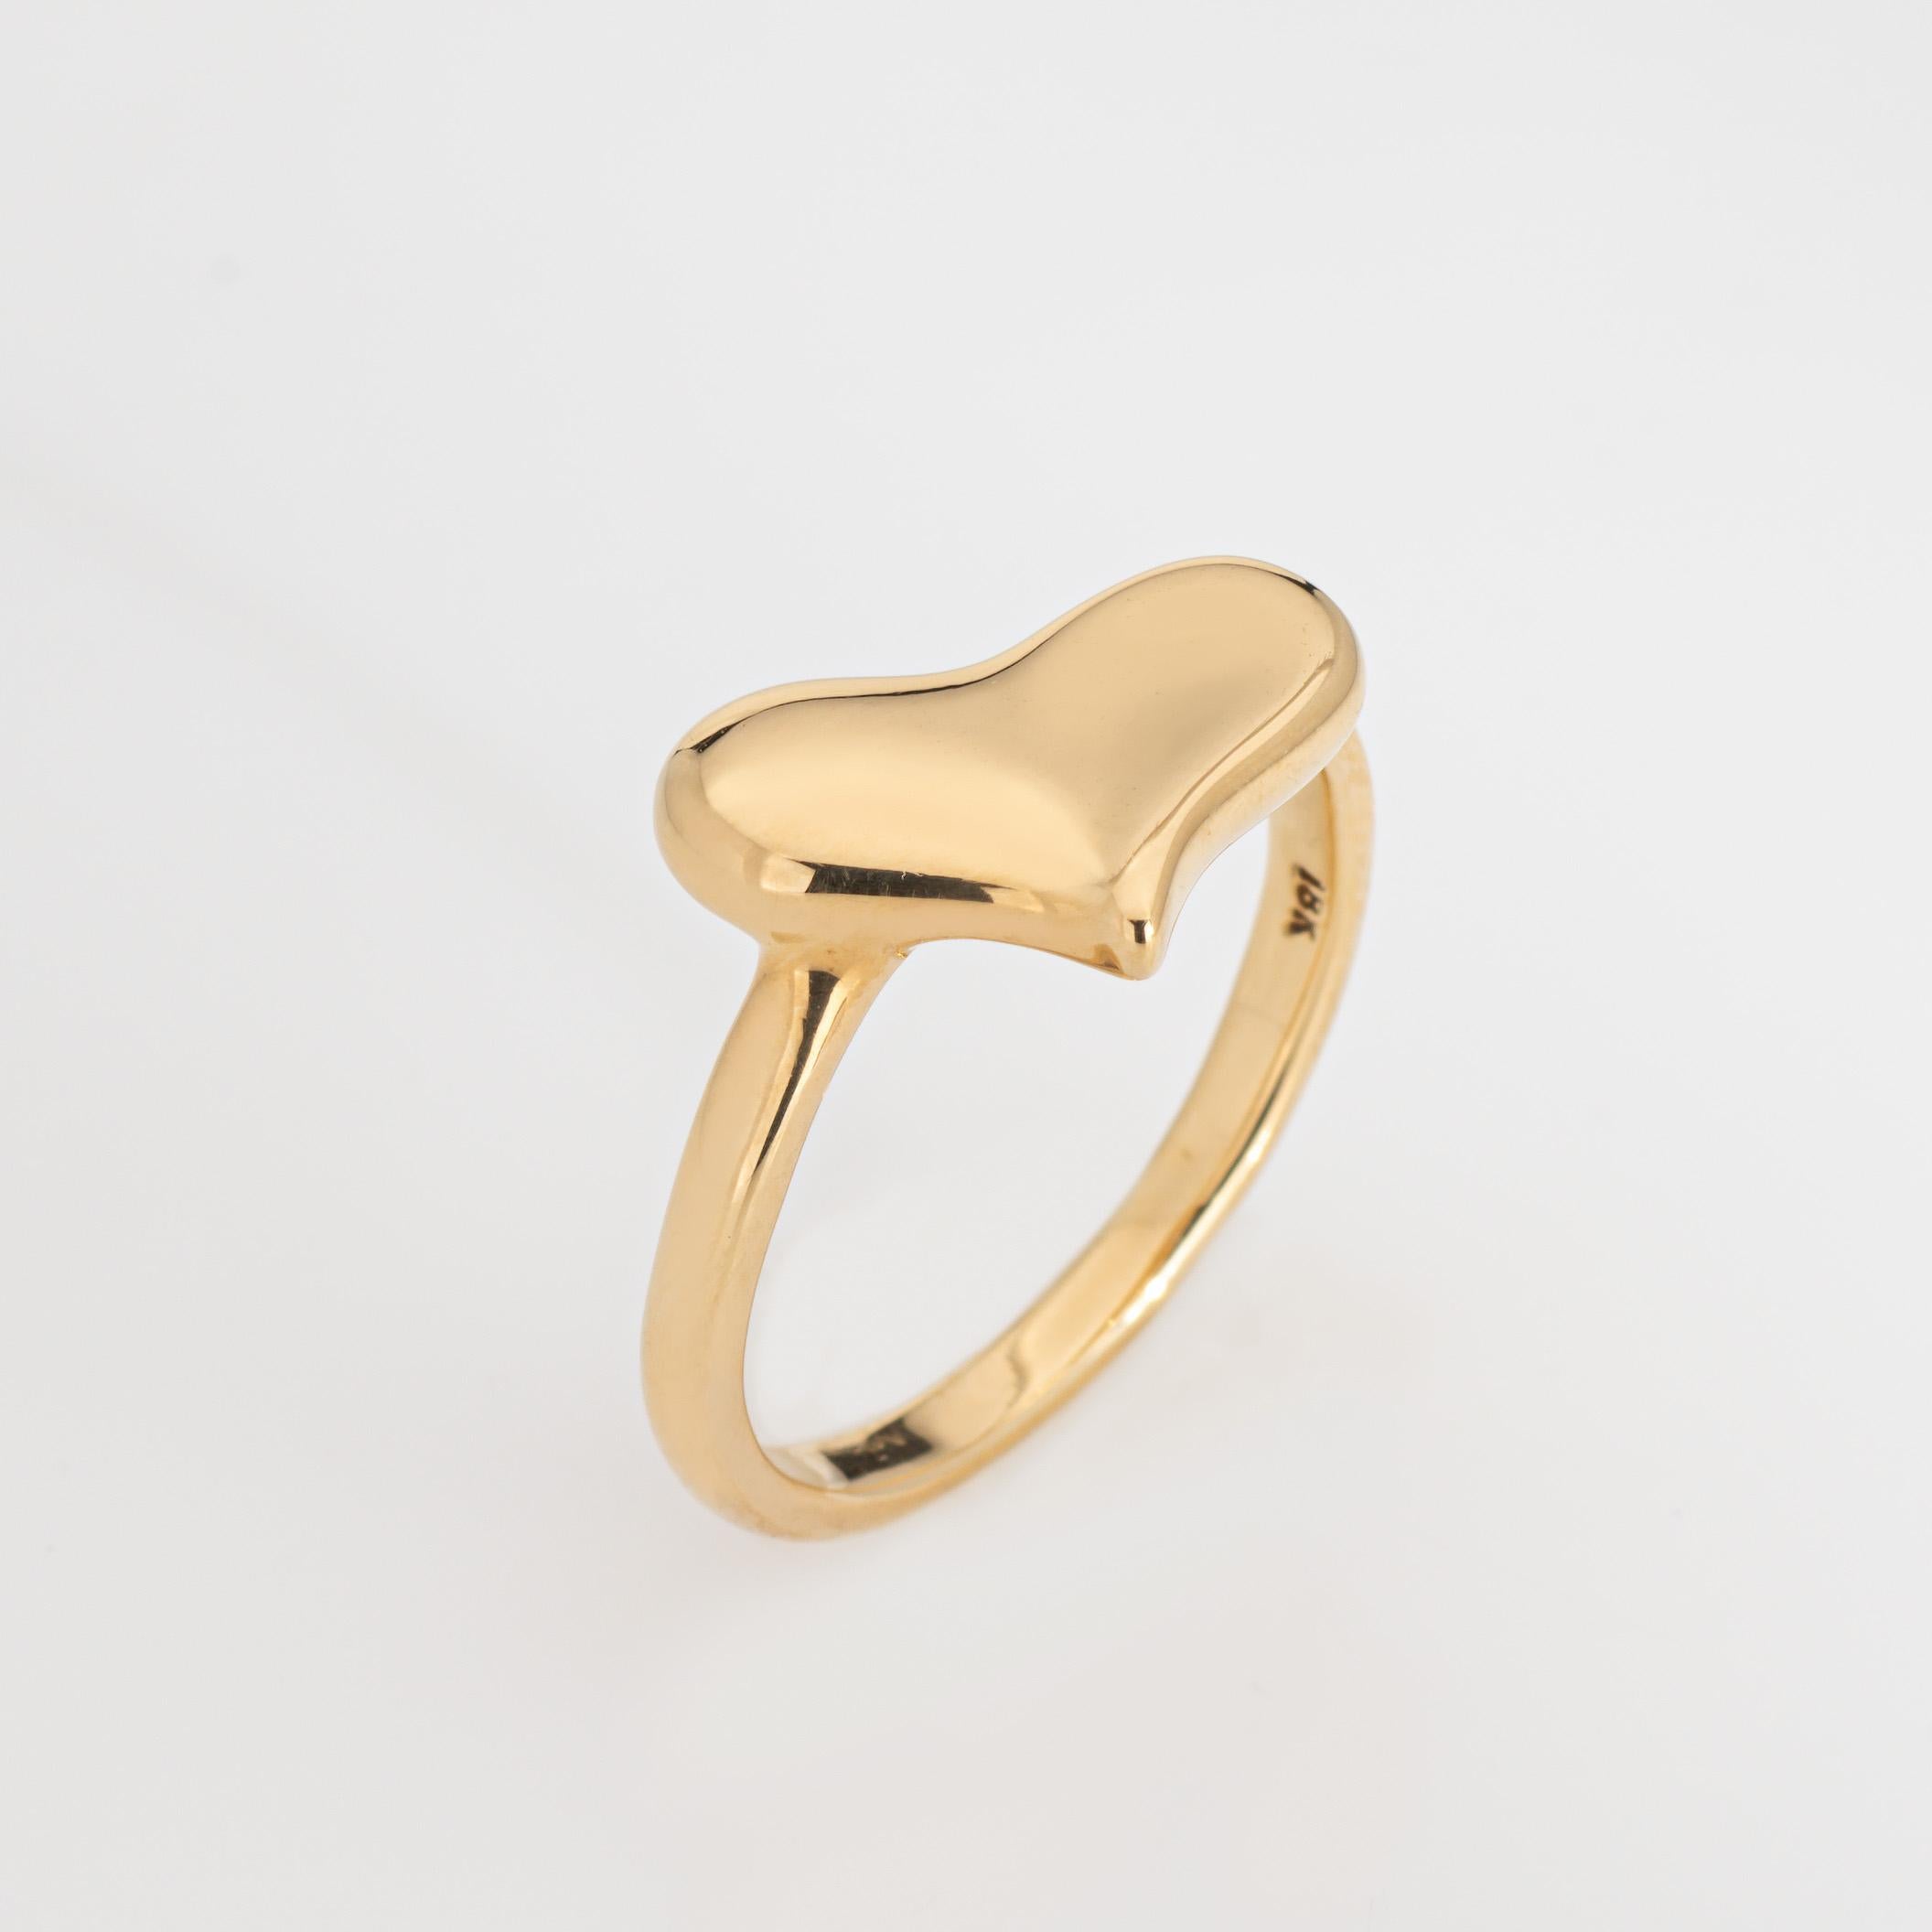 Vintage Angela Cummings heart ring crafted in 18 karat yellow gold (circa 1992).  

The whimsical heart is designed in a slightly off-center position. The iconic designer worked for Tiffany & Co for 18 years, branching away in 1992 to start her own